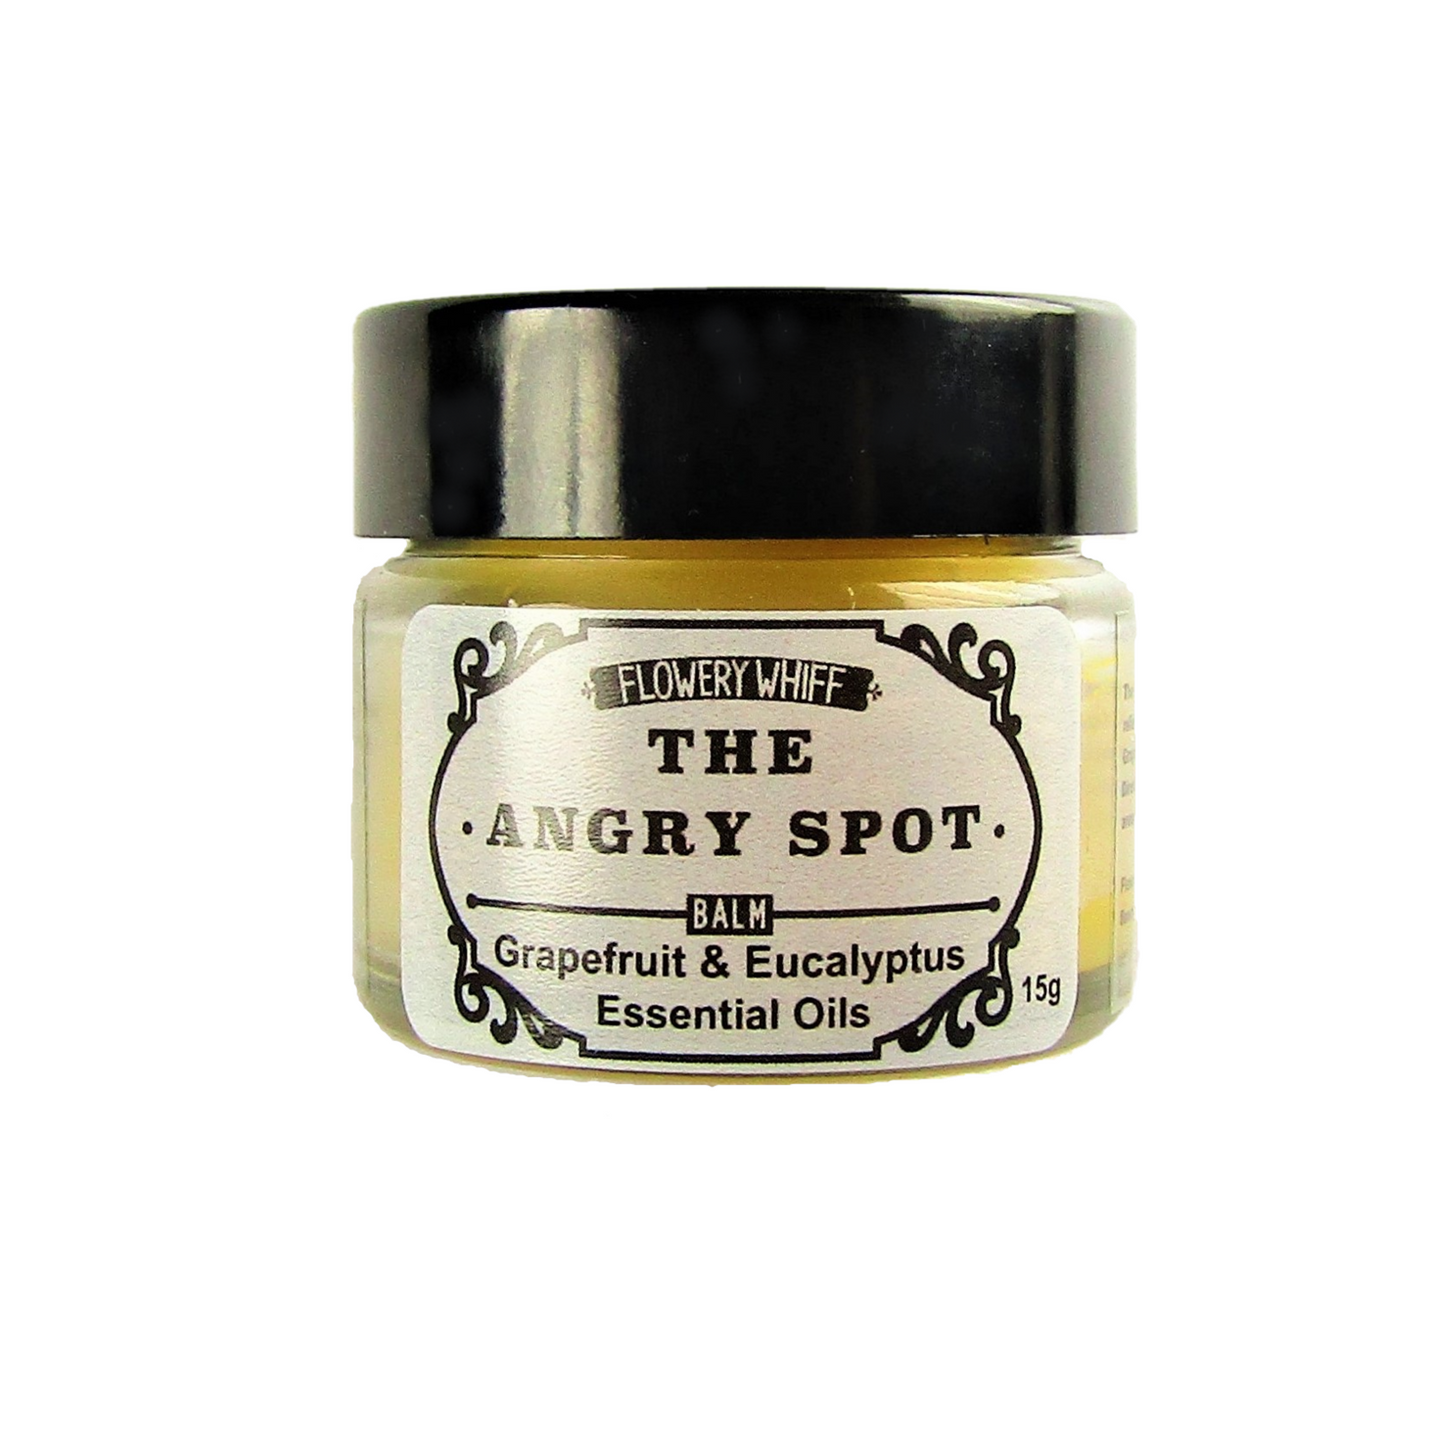 The Angry Spot Soothing Balm